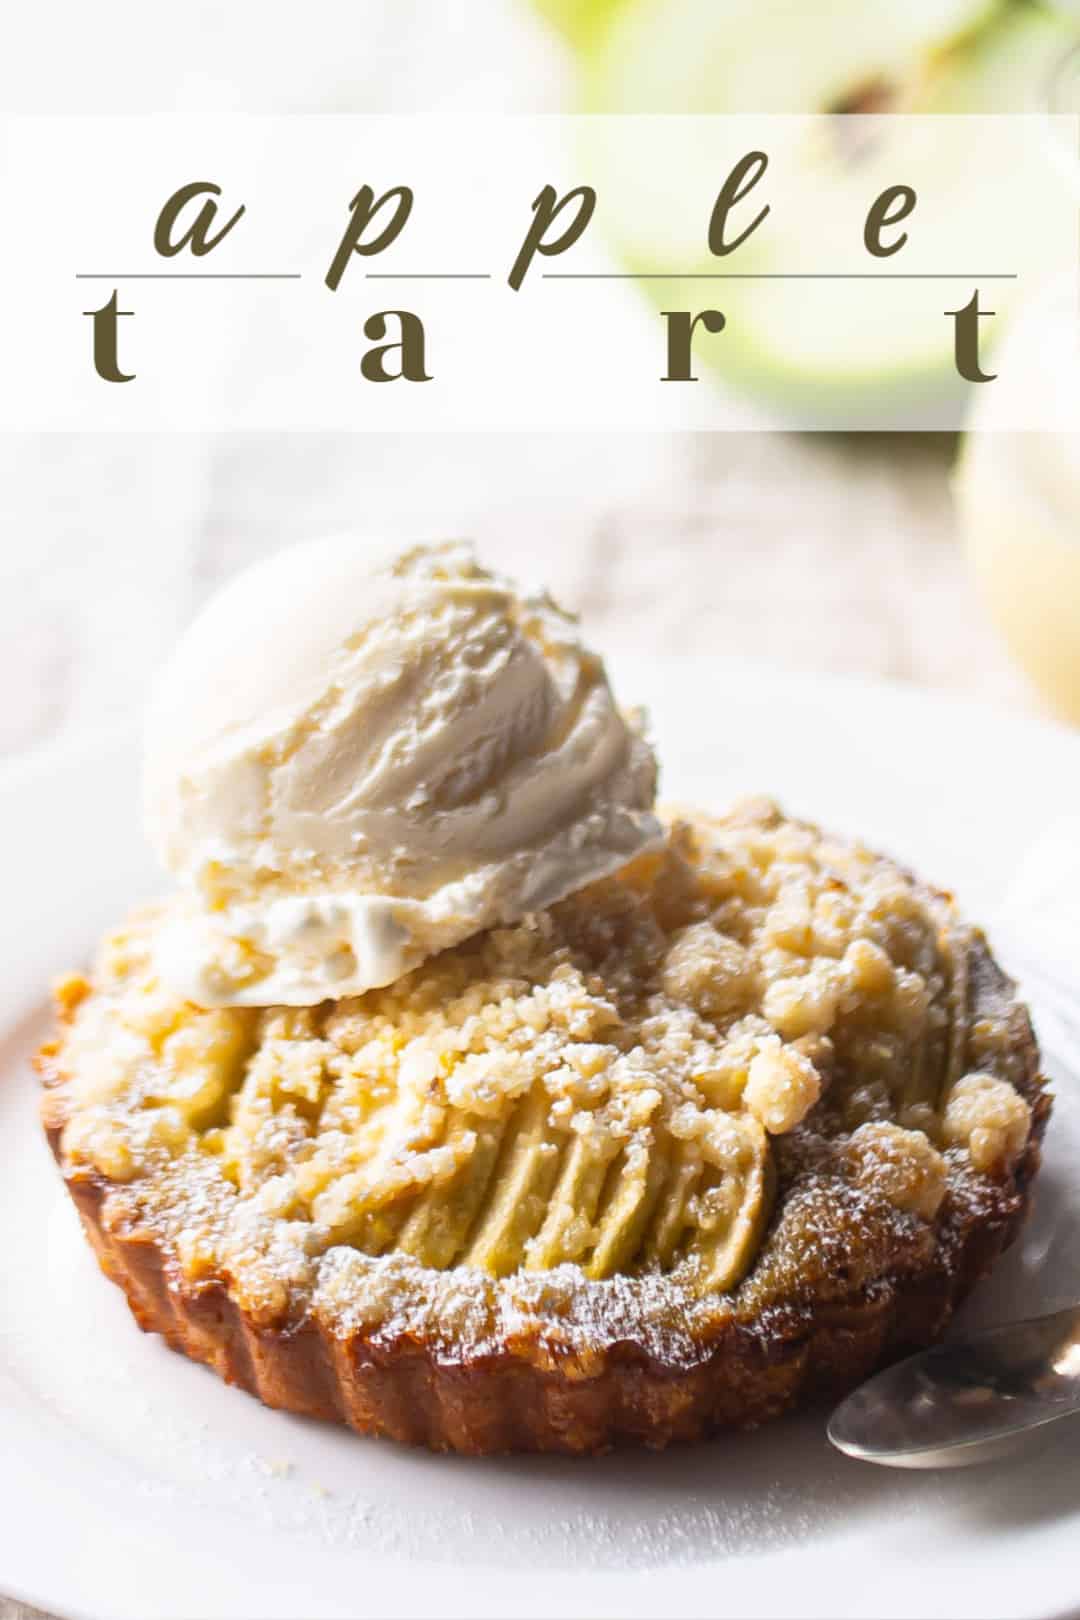 Apple tart recipe, prepared and served with vanilla ice cream, with a text overlay above that reads "Apple Tart."